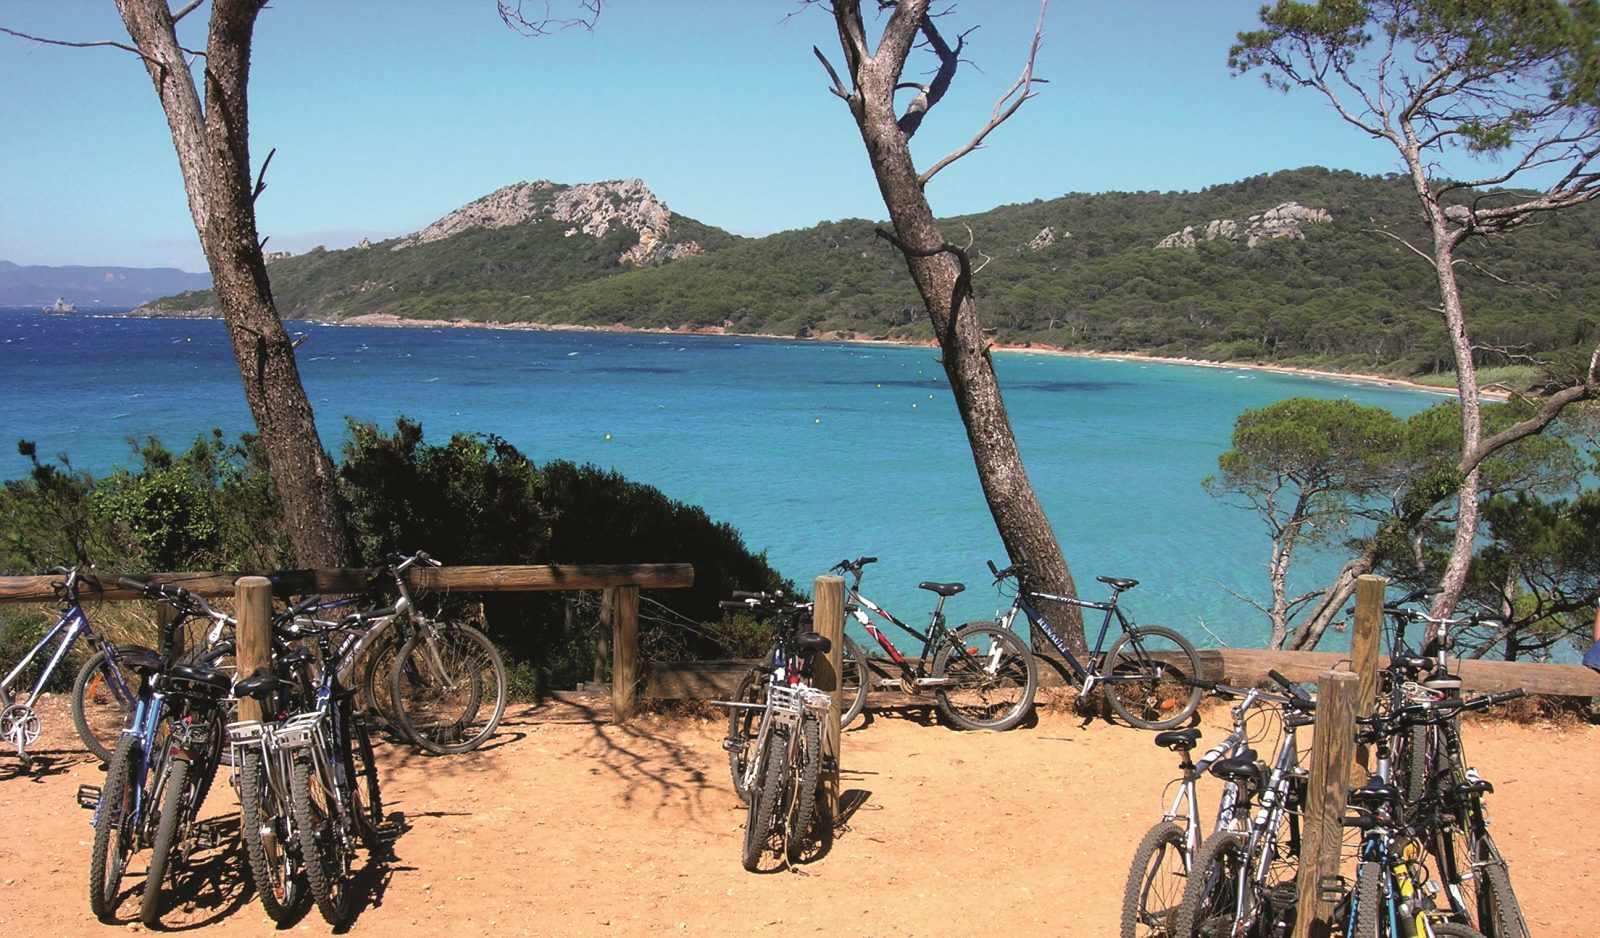 Day trip by bike in Porquerolles from the port of La Londe les Maures